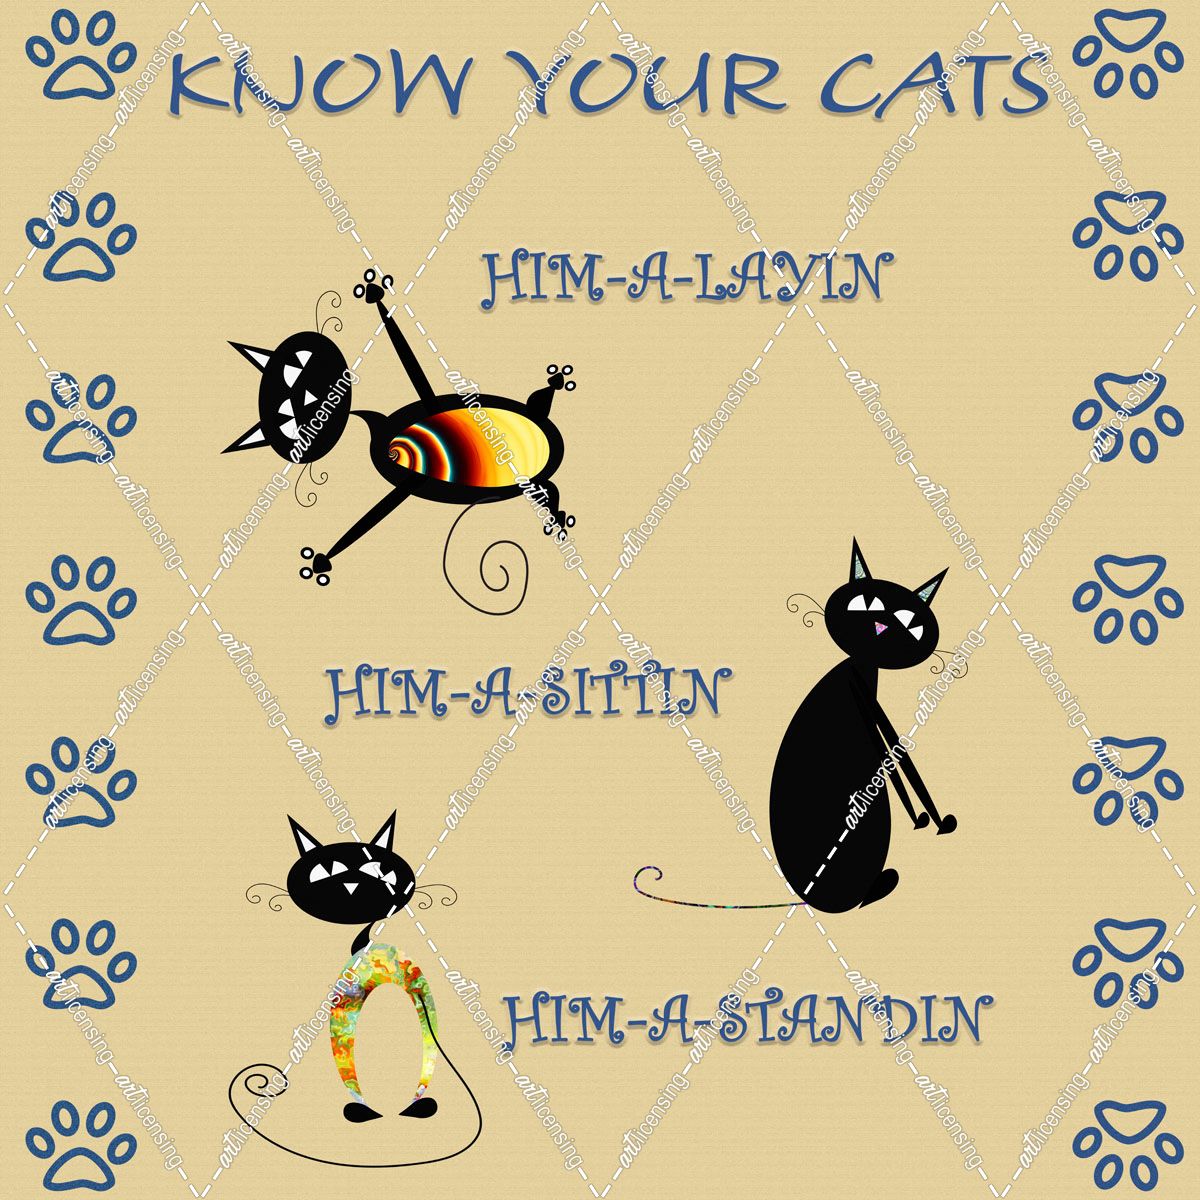 KNOW YOUR CATS copy